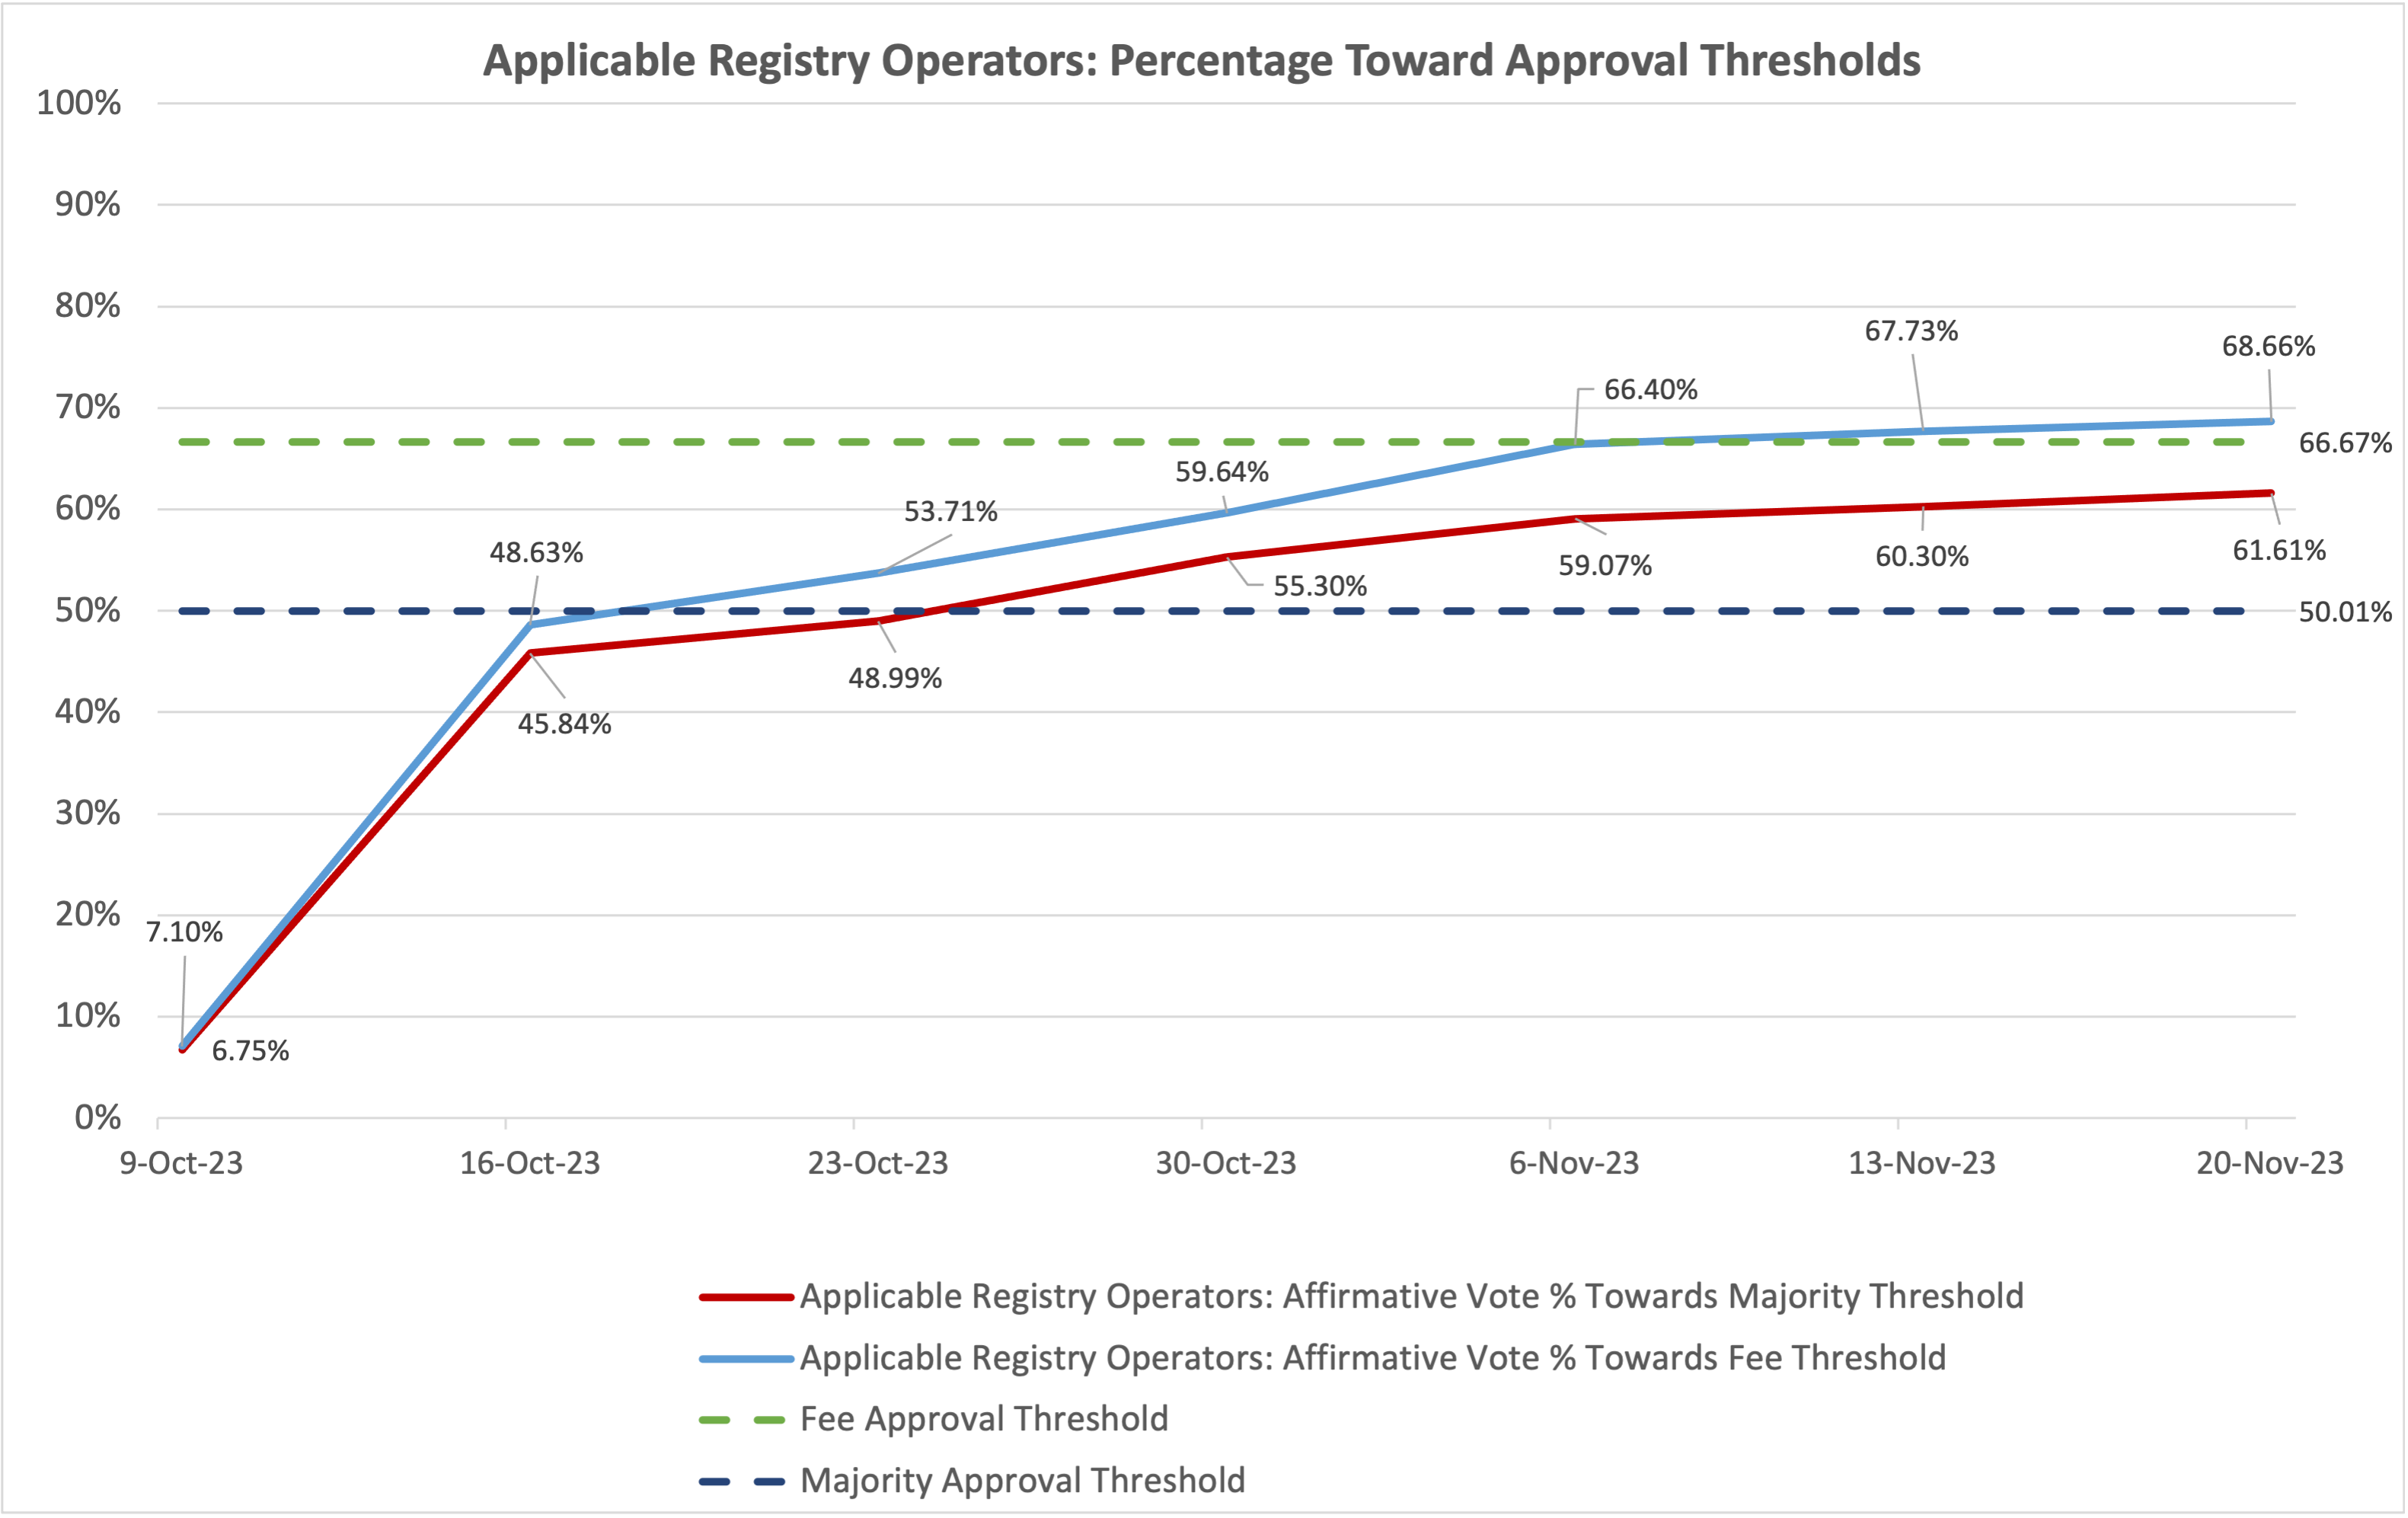 Line chart of the progress of the vote towards meeting the fee and majority threshold for Applicable Registry Operators, where the fee threshold is 66.67% and the majority threshold is 50.01%. The data shows that as of the 20th of November 2023, the affirmative vote towards the fee approval threshold is at 68.66% and the affirmative vote towards the majority approval threshold is at 61.61%.